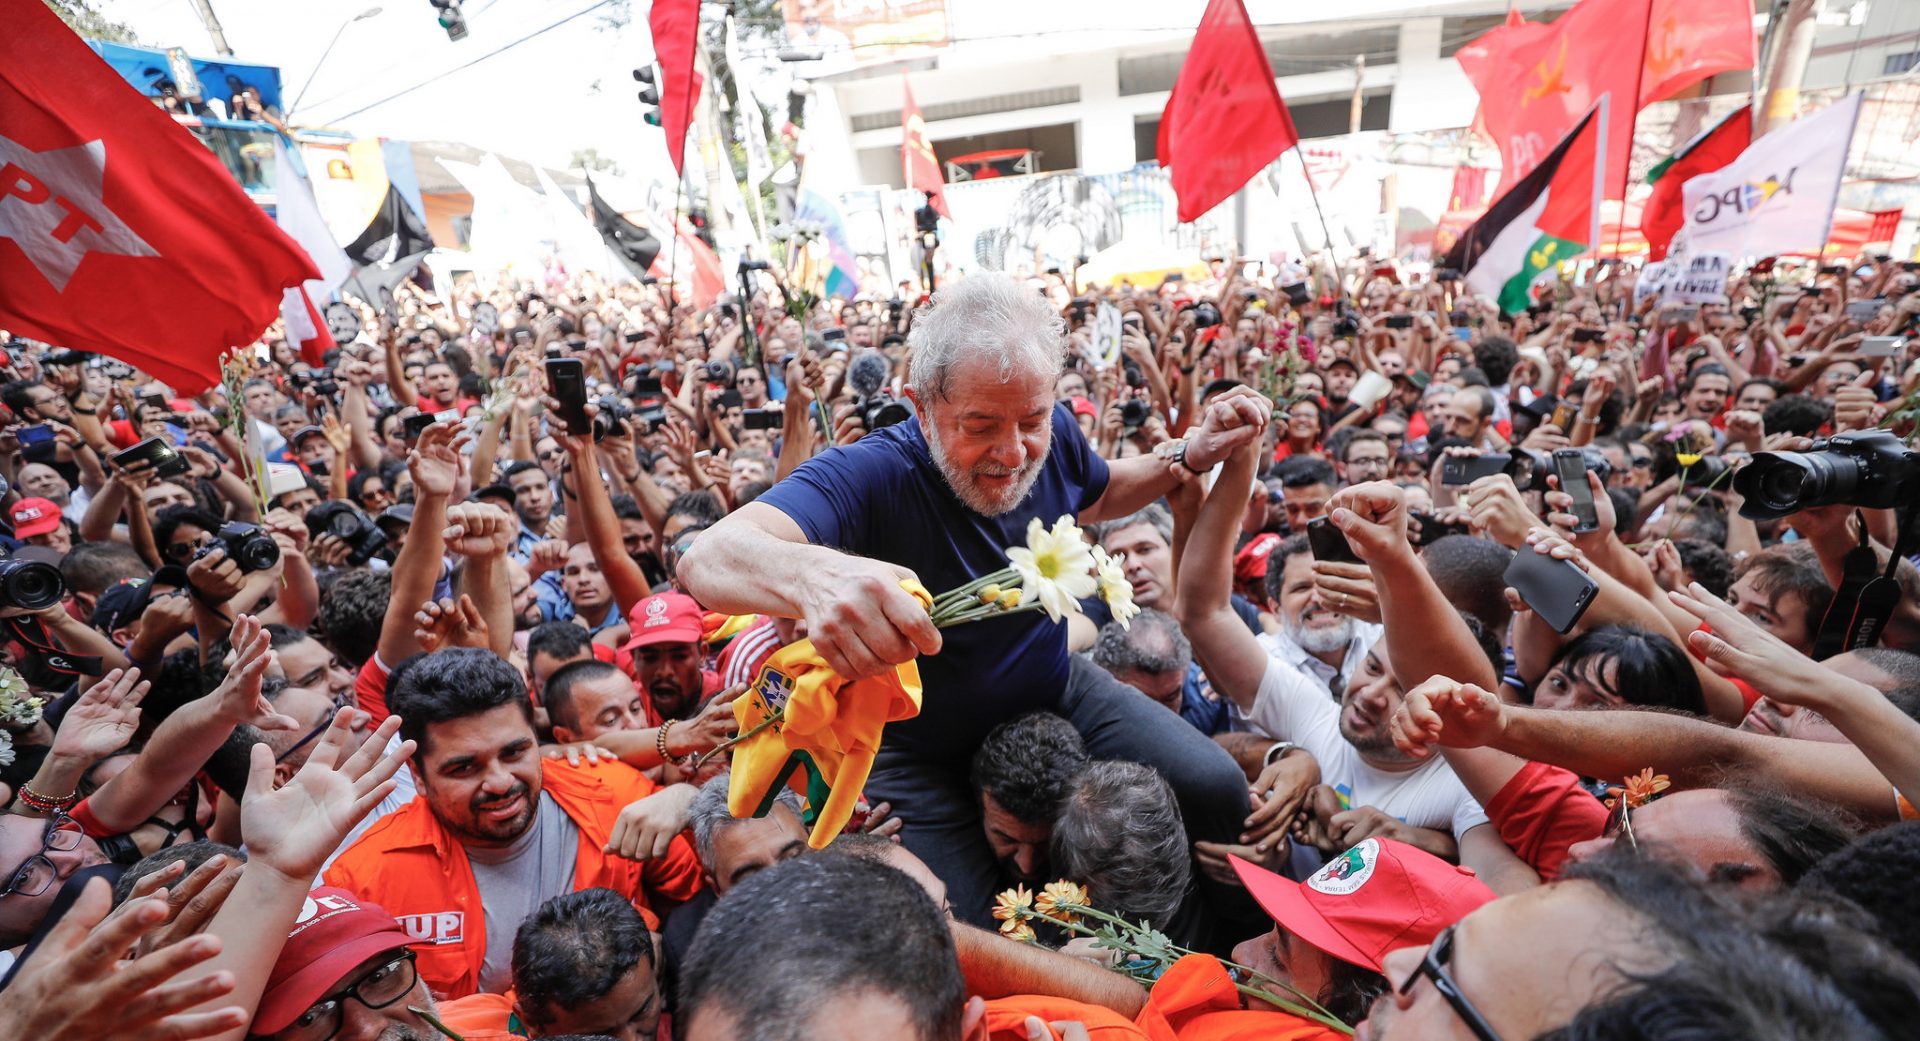 Lula said he would walk to the vigil that had greeted him daily since he was arrested and take a shot of 'cachaça' with his faithful supporters to celebrate.